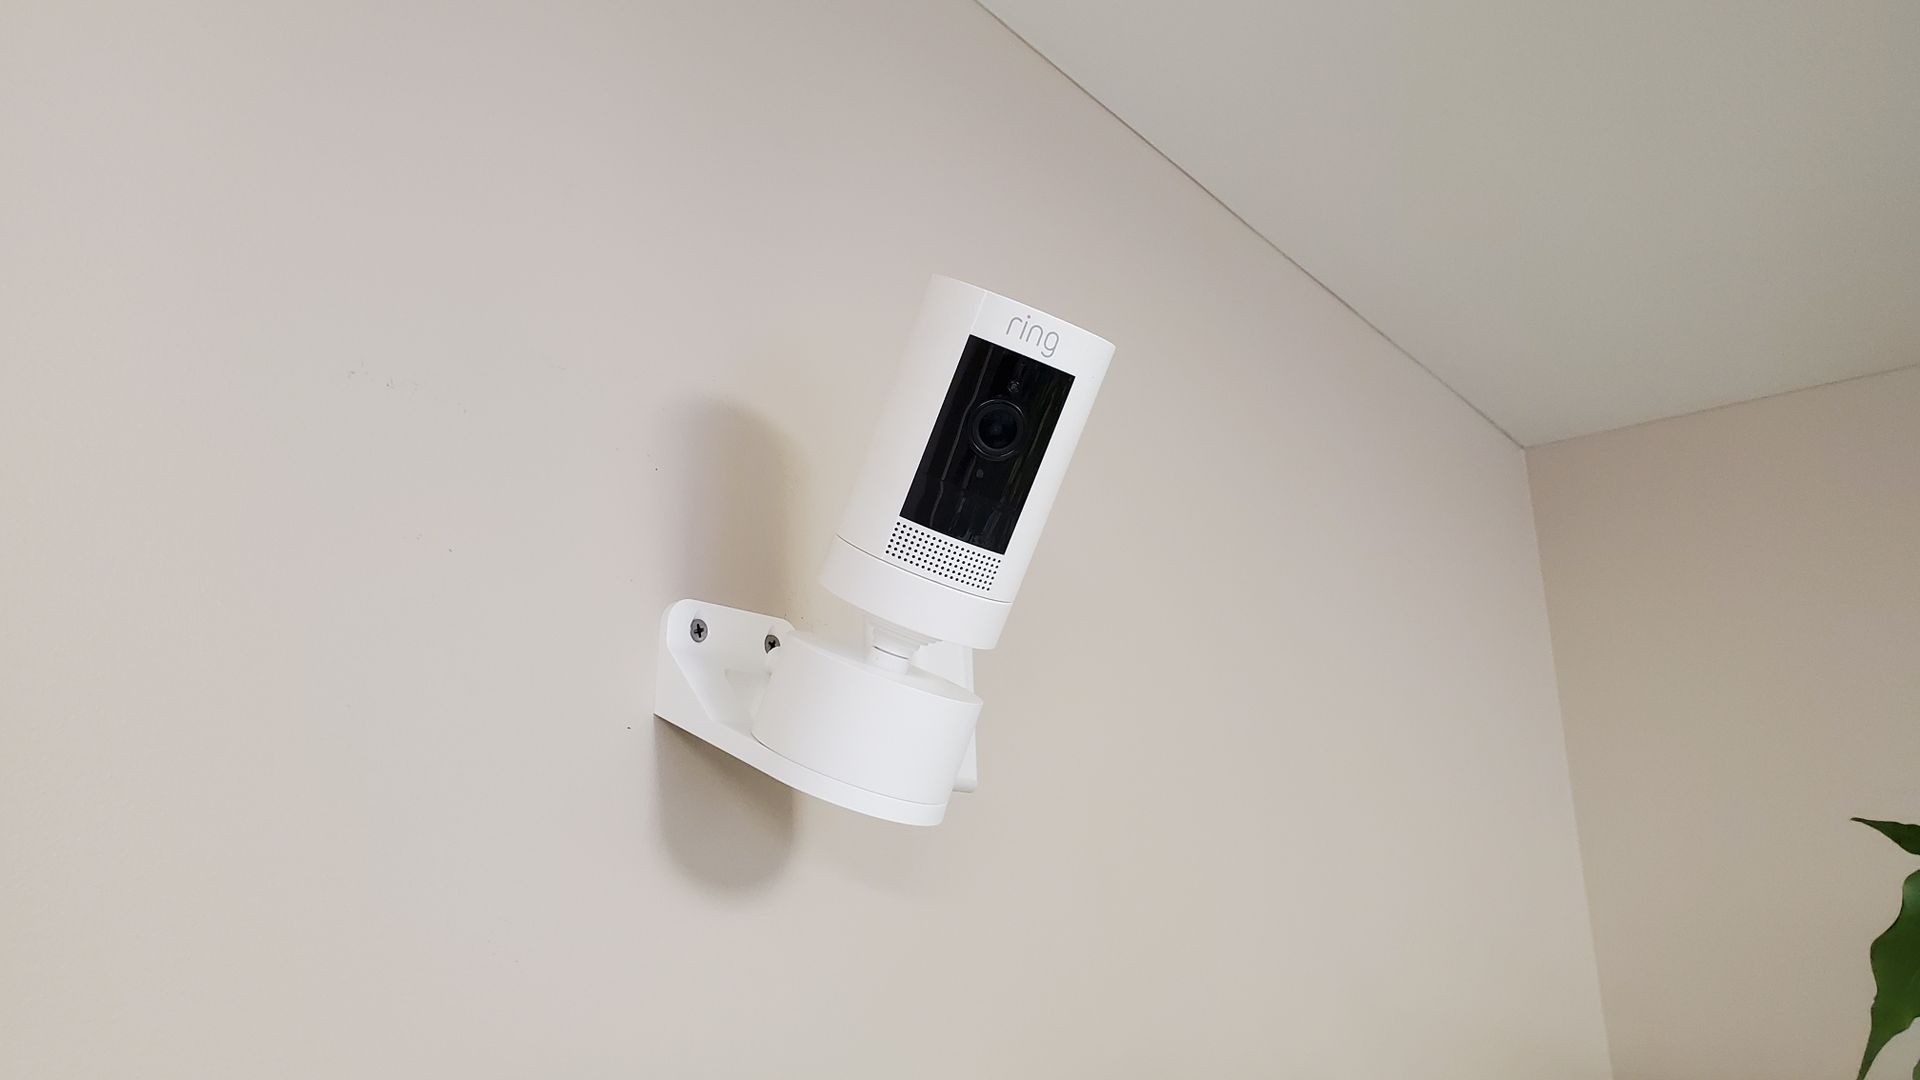 a security camera is mounted on a wall in a room.